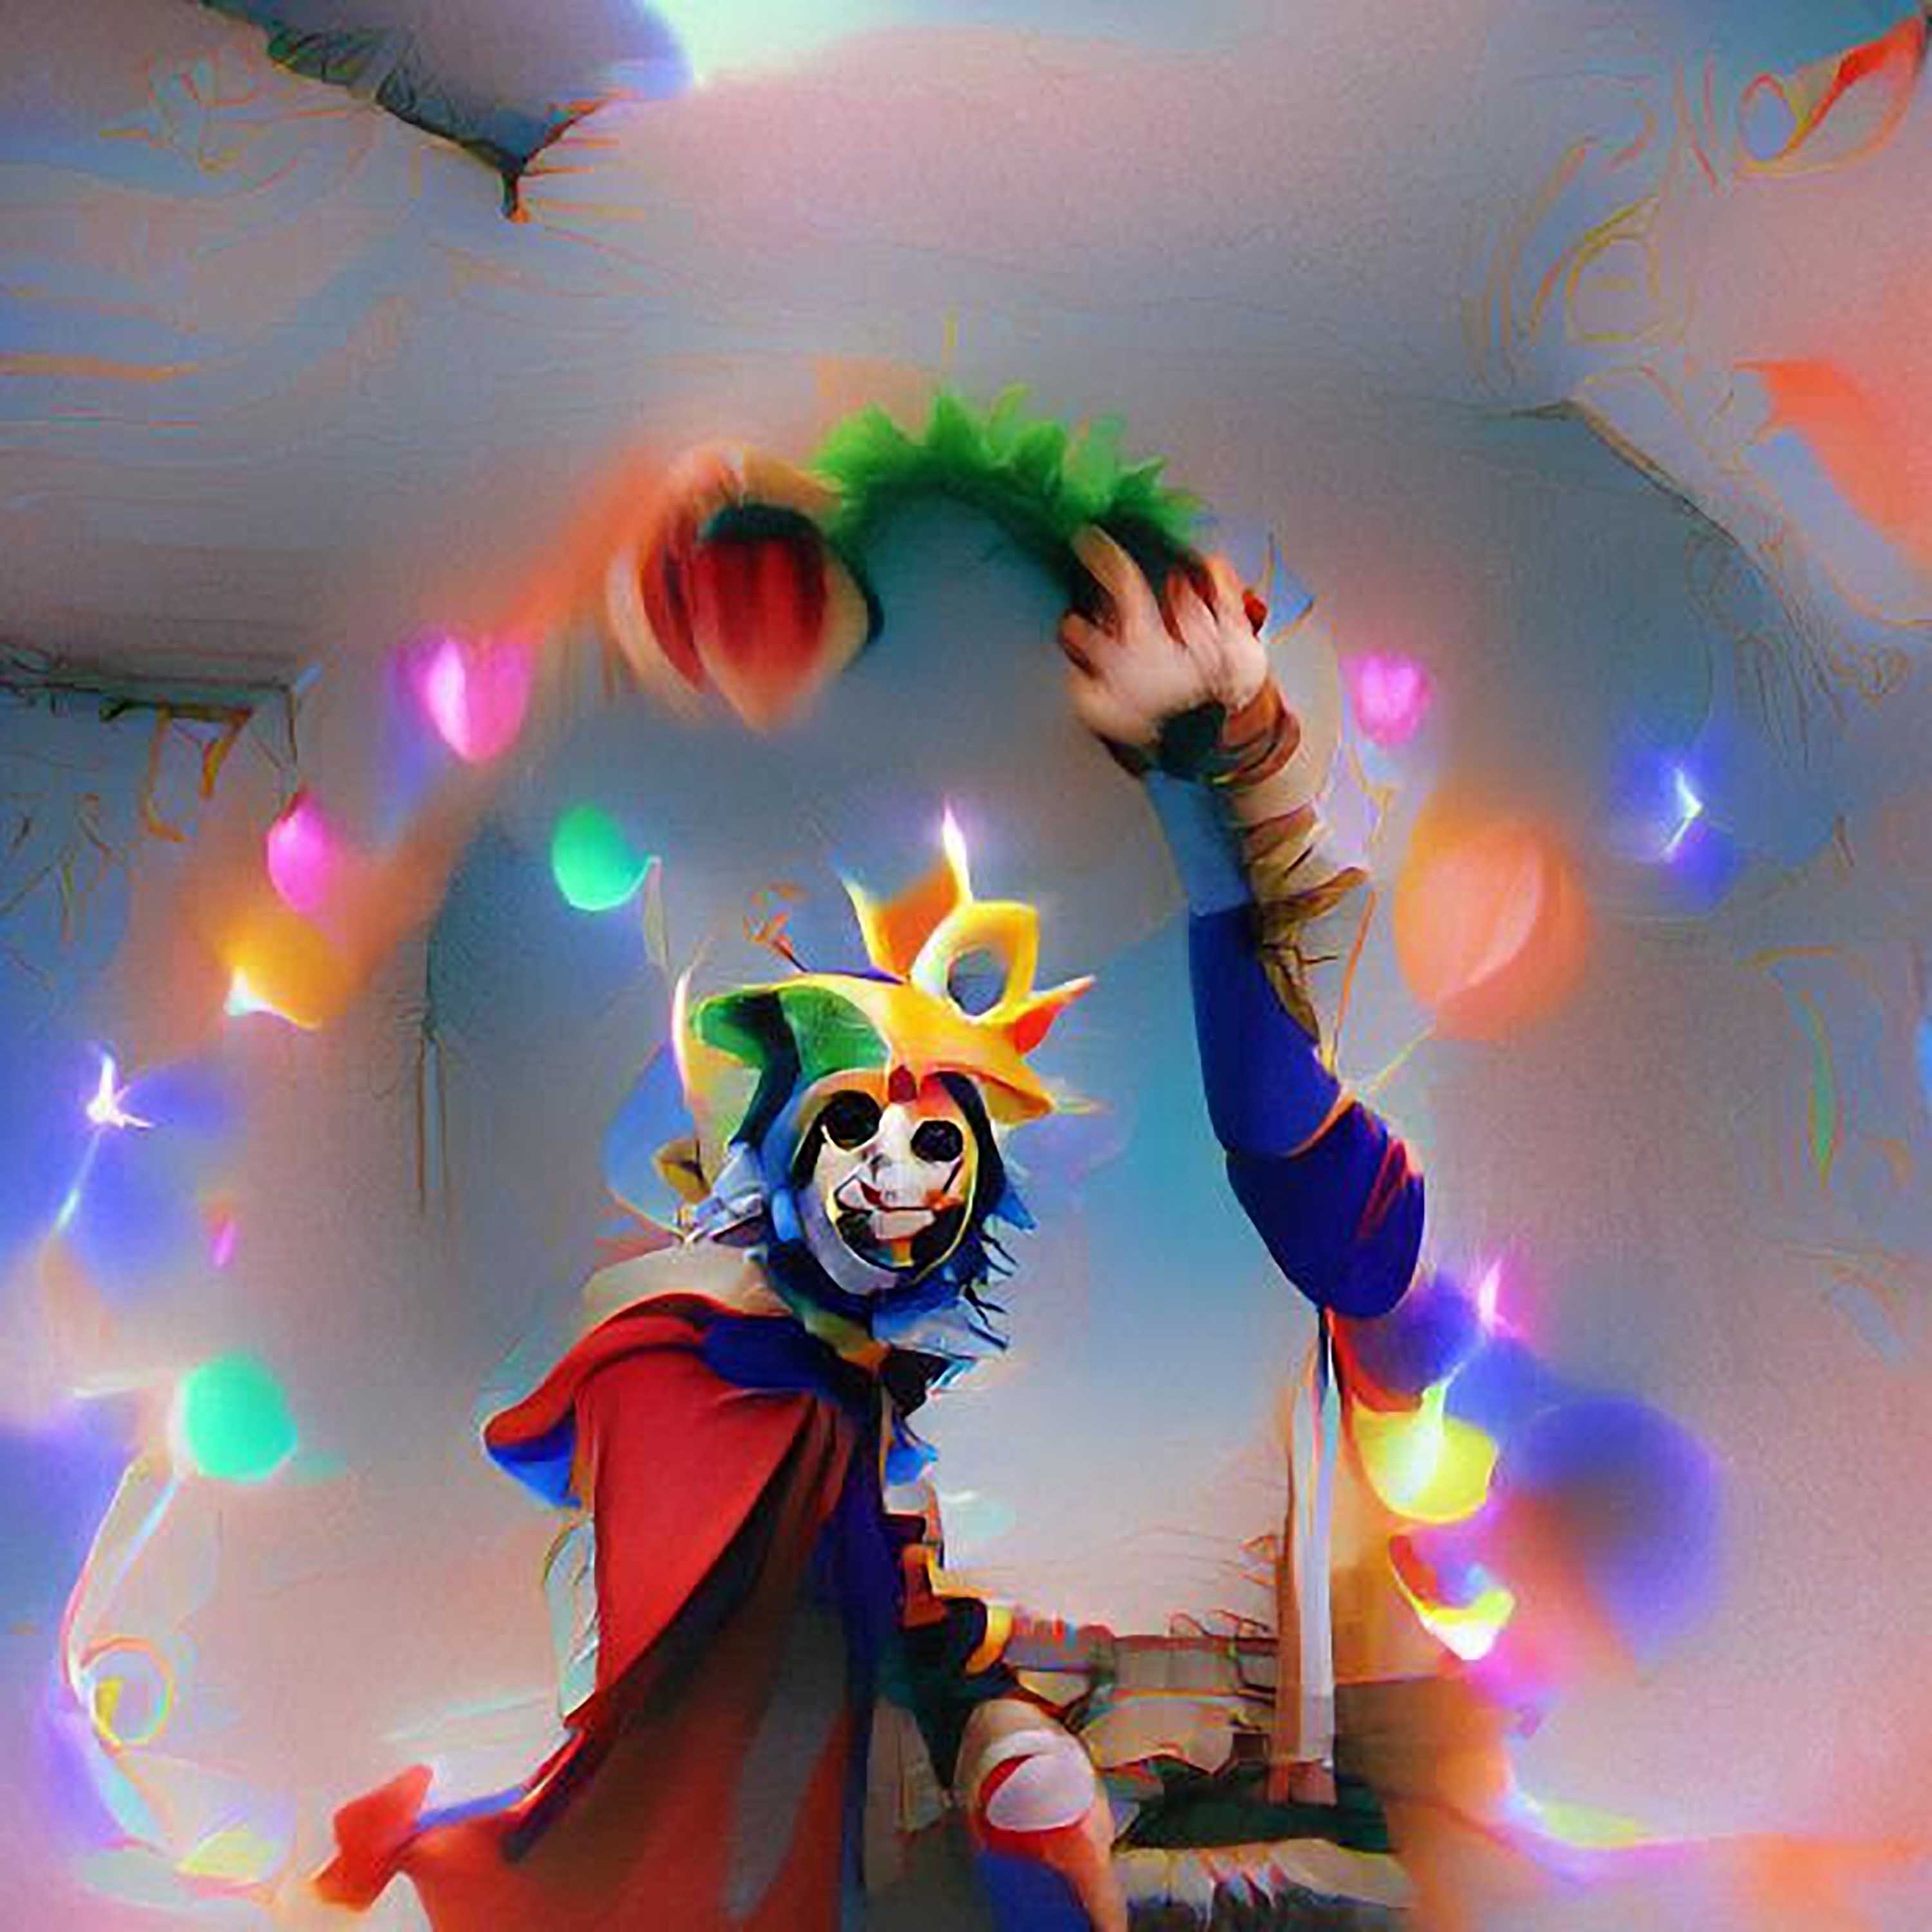 #108 - "I'm the Fun Jester and the Sun blessed all the lands of the Earth, join hands as rebirth consumes the body's heavy parts, my bright Love will Lighten up all the human’s heavy hearts"